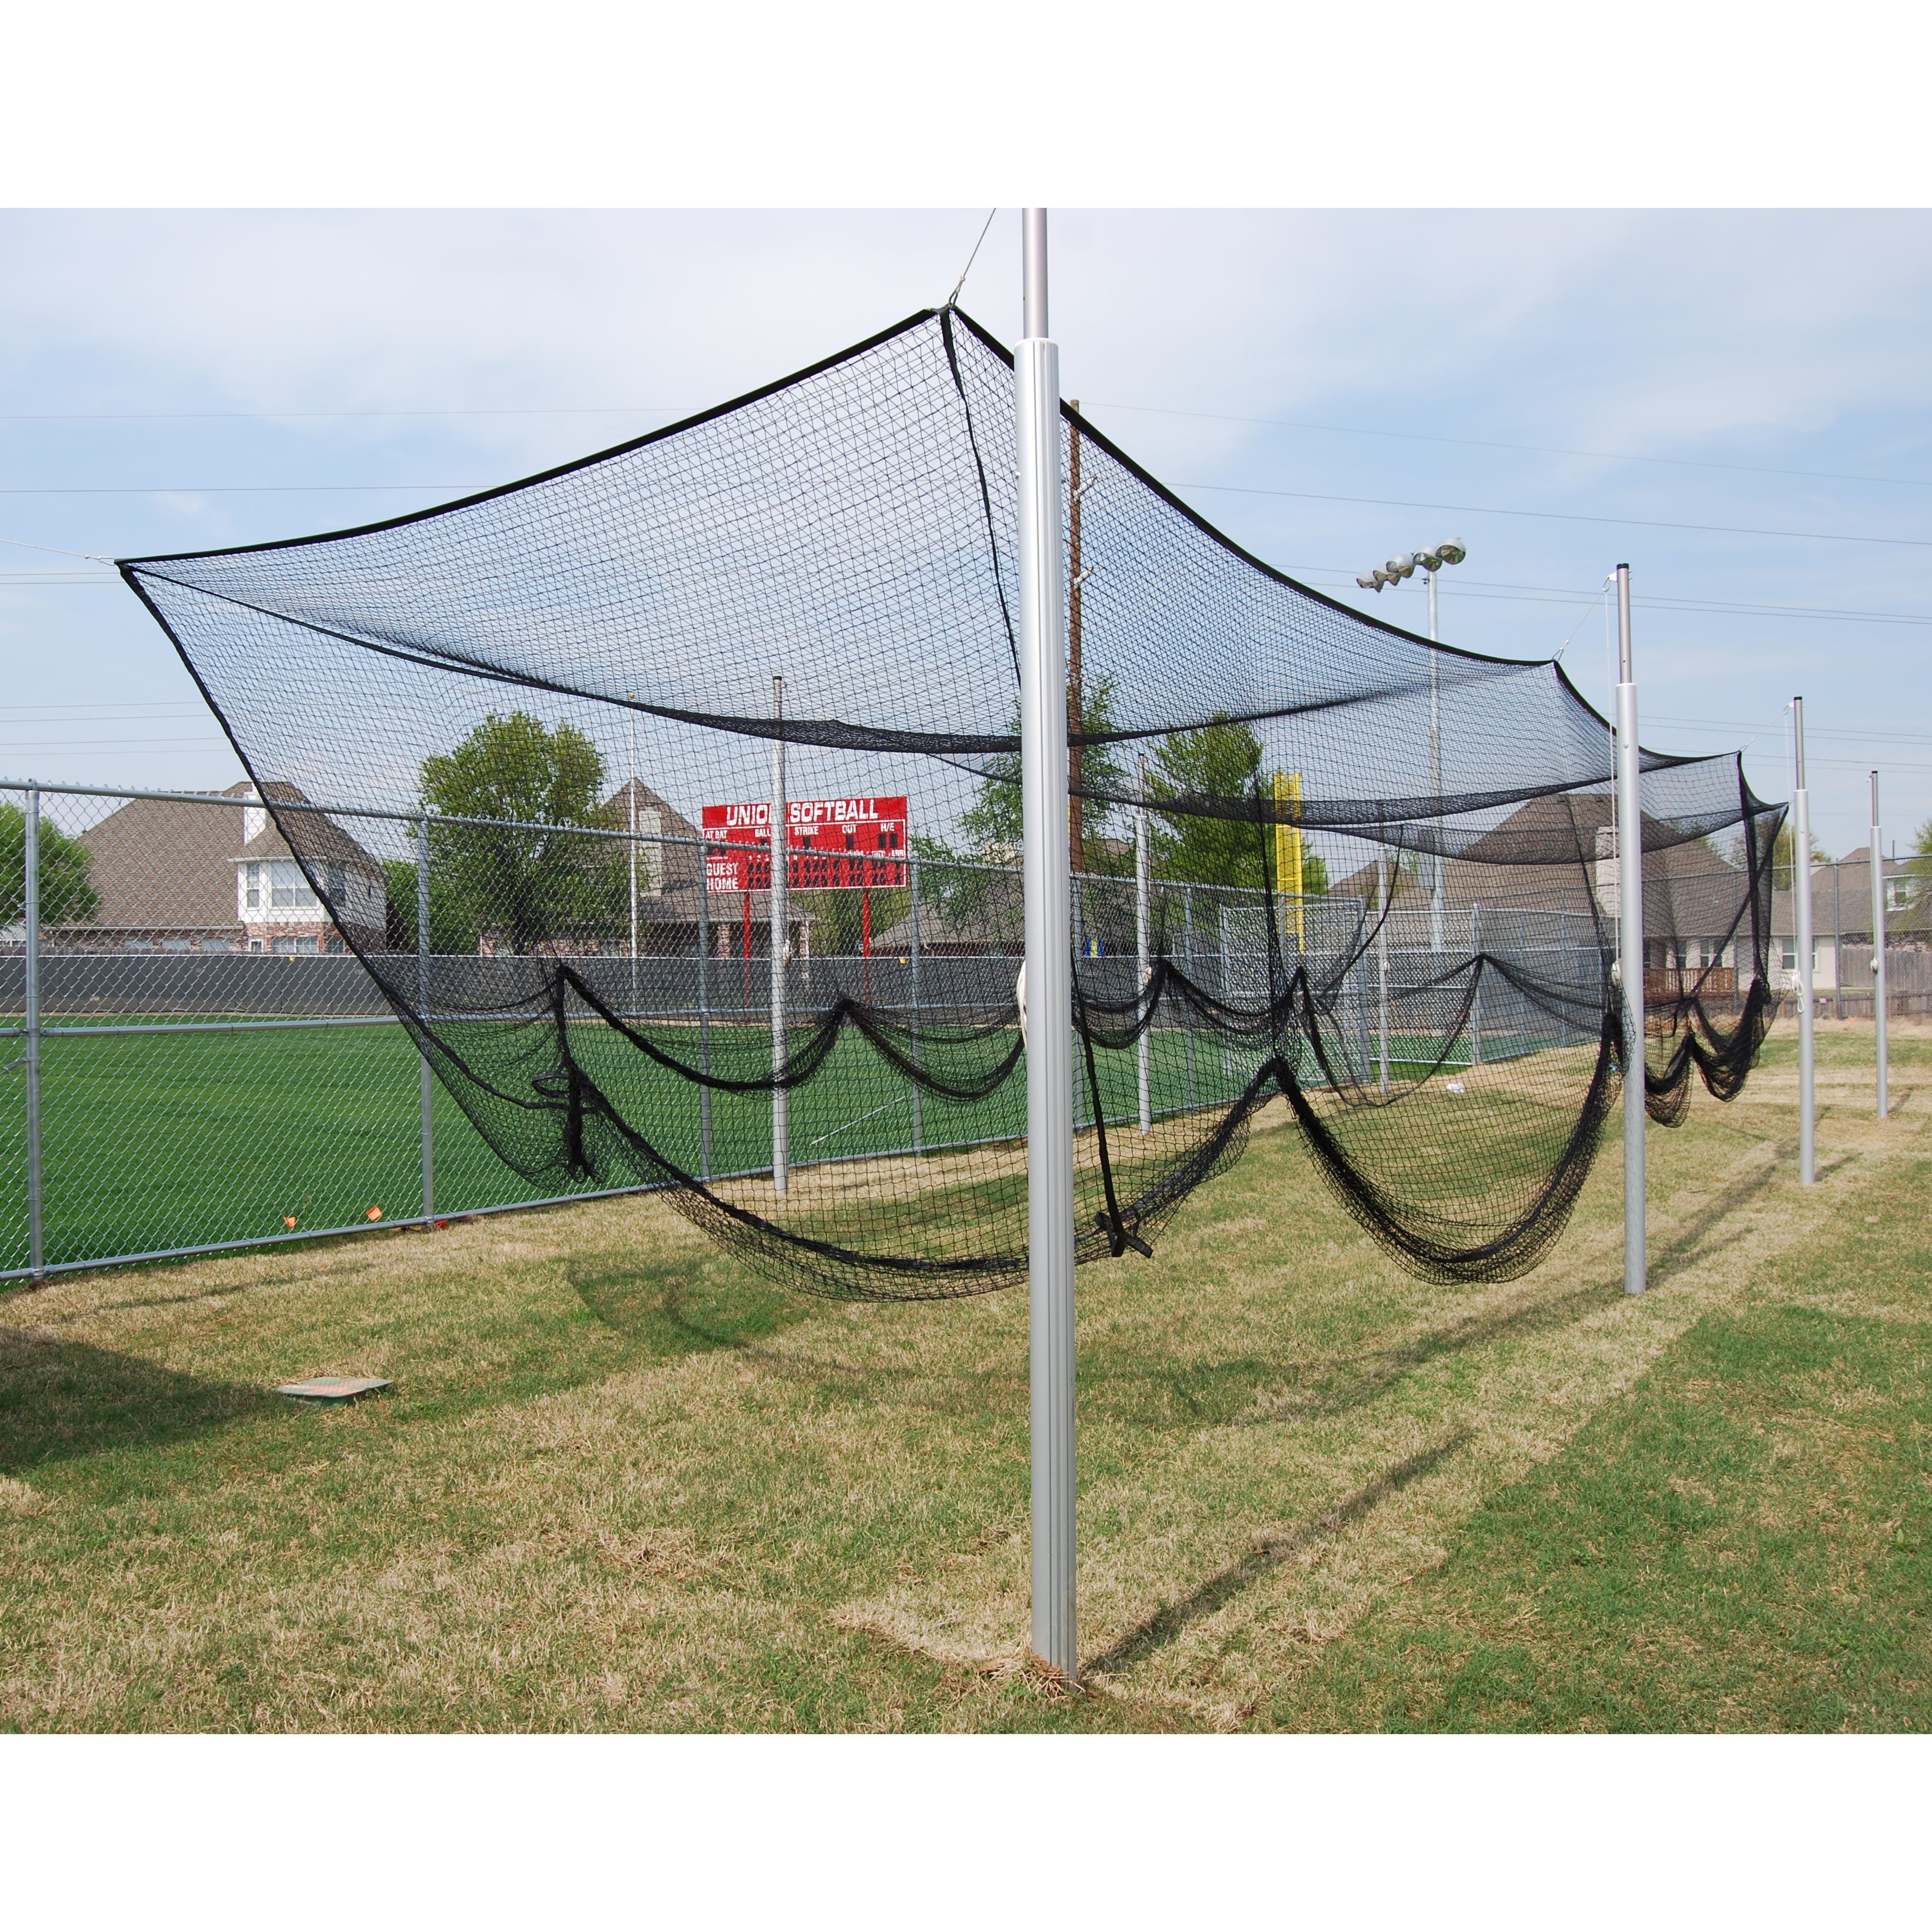 Gared Outdoor 3-1/2" O.D. Steel Batting Cage, 55'